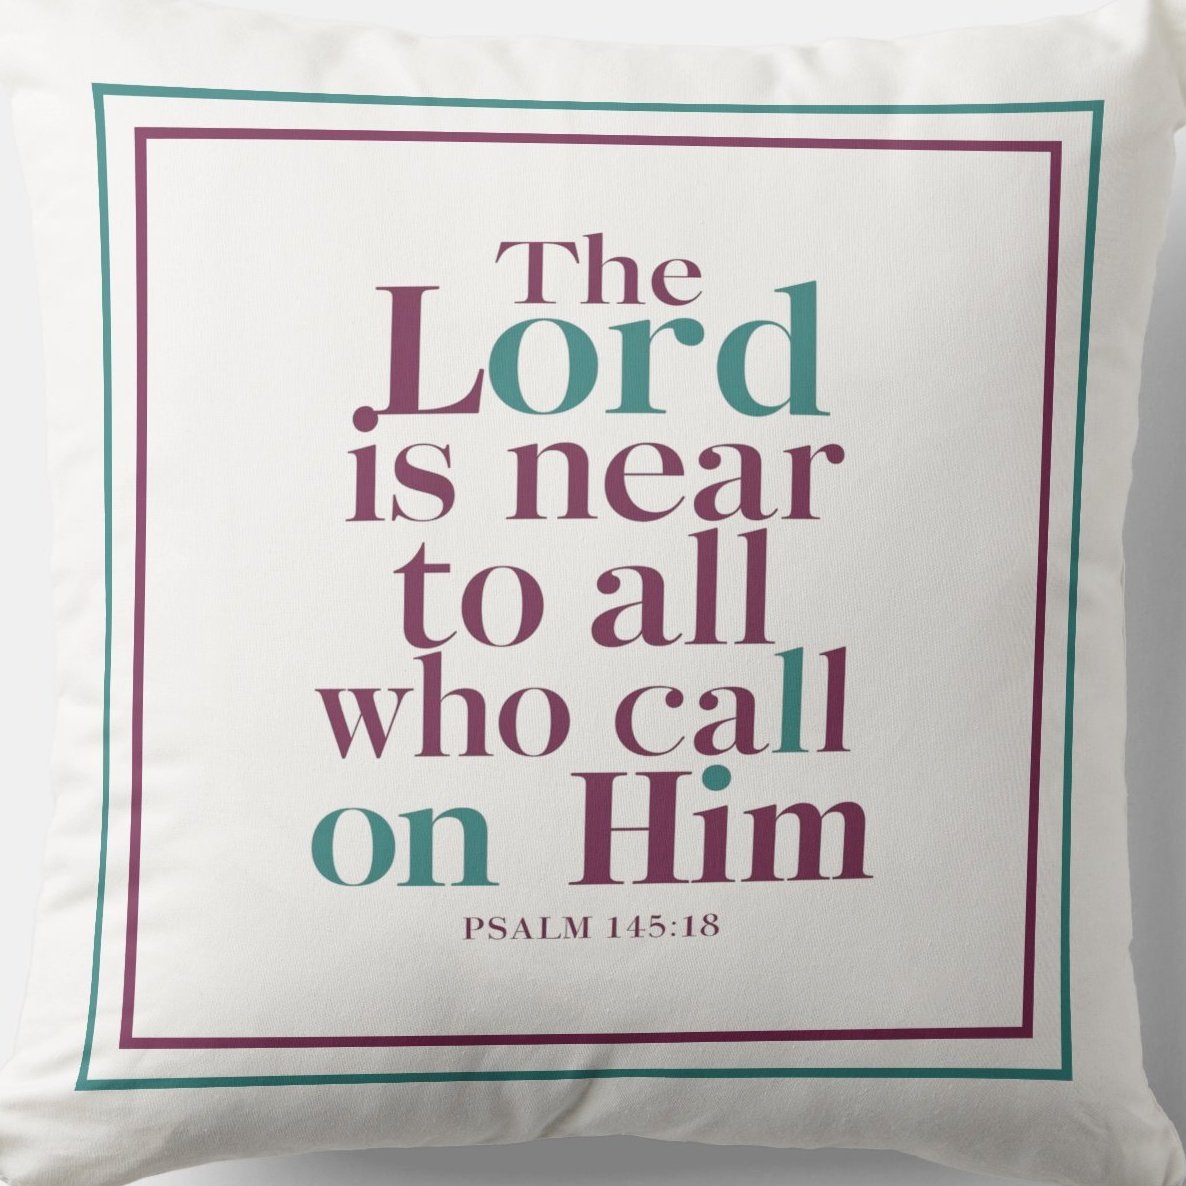 The Lord Is Near To All Who Call On Him zazzle.com/the_lord_is_ne… Throw #Pillow #Blessing #JesusChrist #JesusSaves #Jesus #christian #spiritual #Homedecoration #uniquegift #giftideas #MothersDayGifts #giftformom #giftidea #HolySpirit #pillows #giftshop #giftsforher #giftsformom